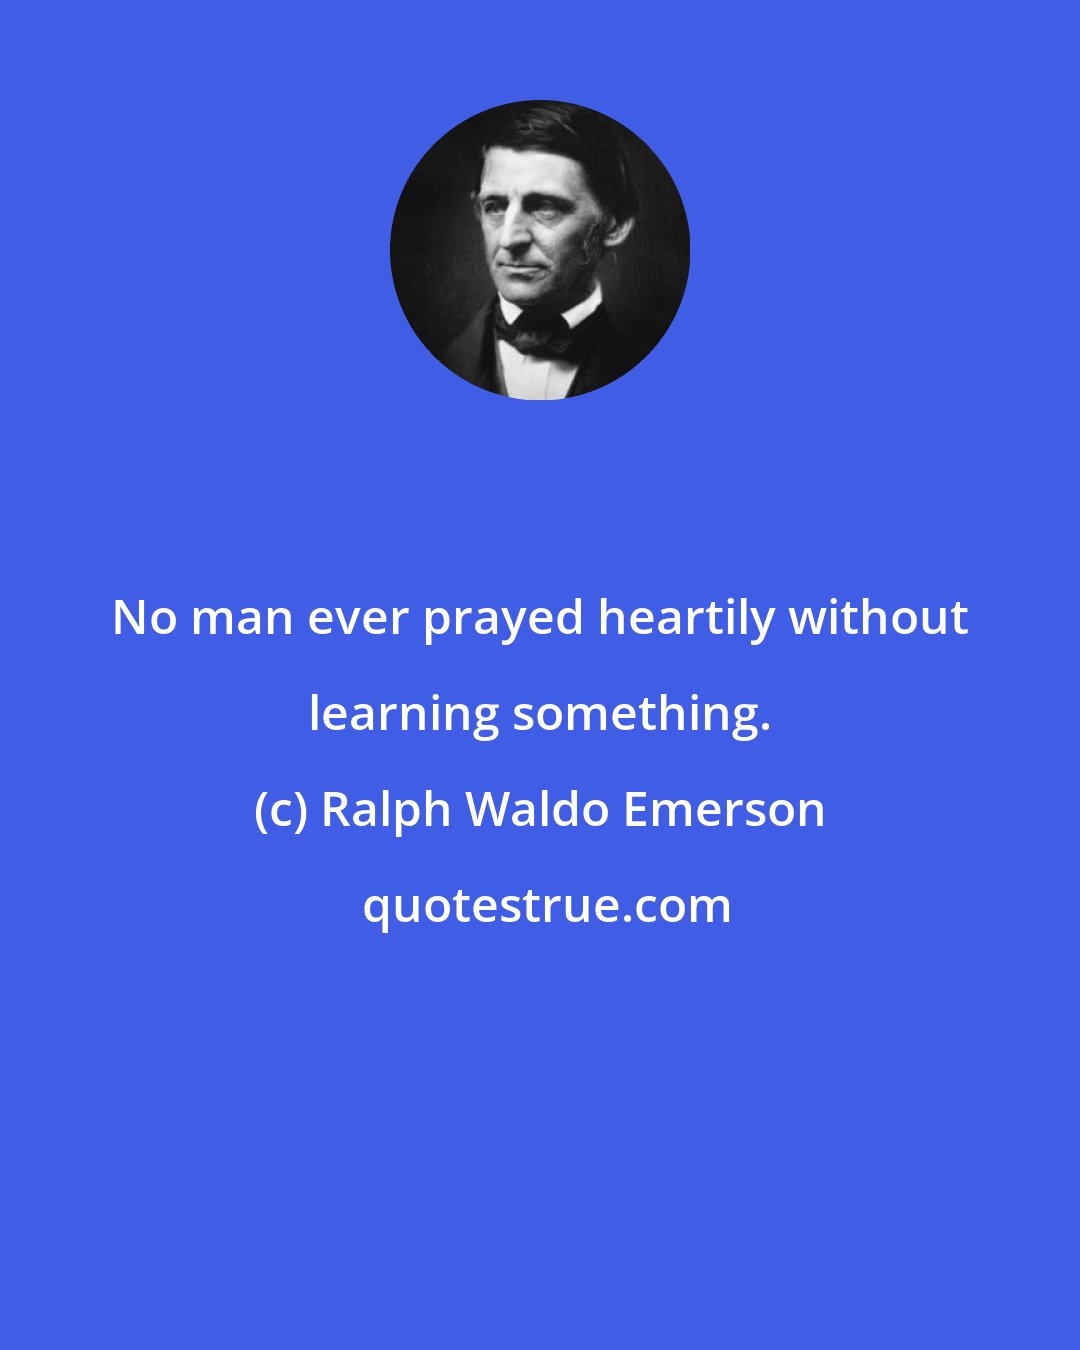 Ralph Waldo Emerson: No man ever prayed heartily without learning something.